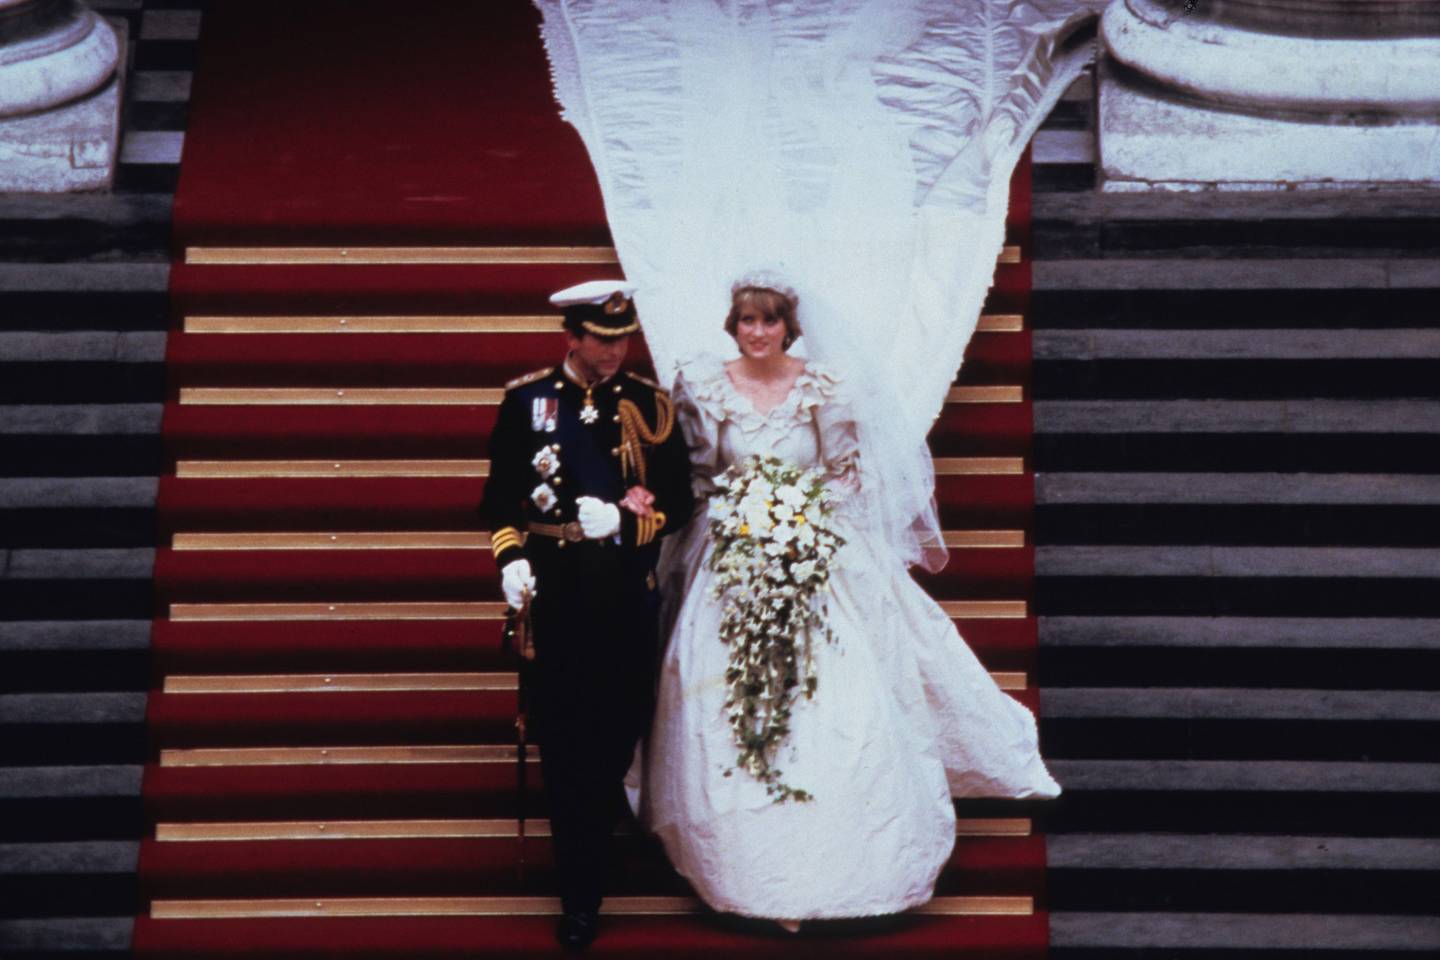 The Wedding of the Century Princess Diana Prince Charles new BritBox